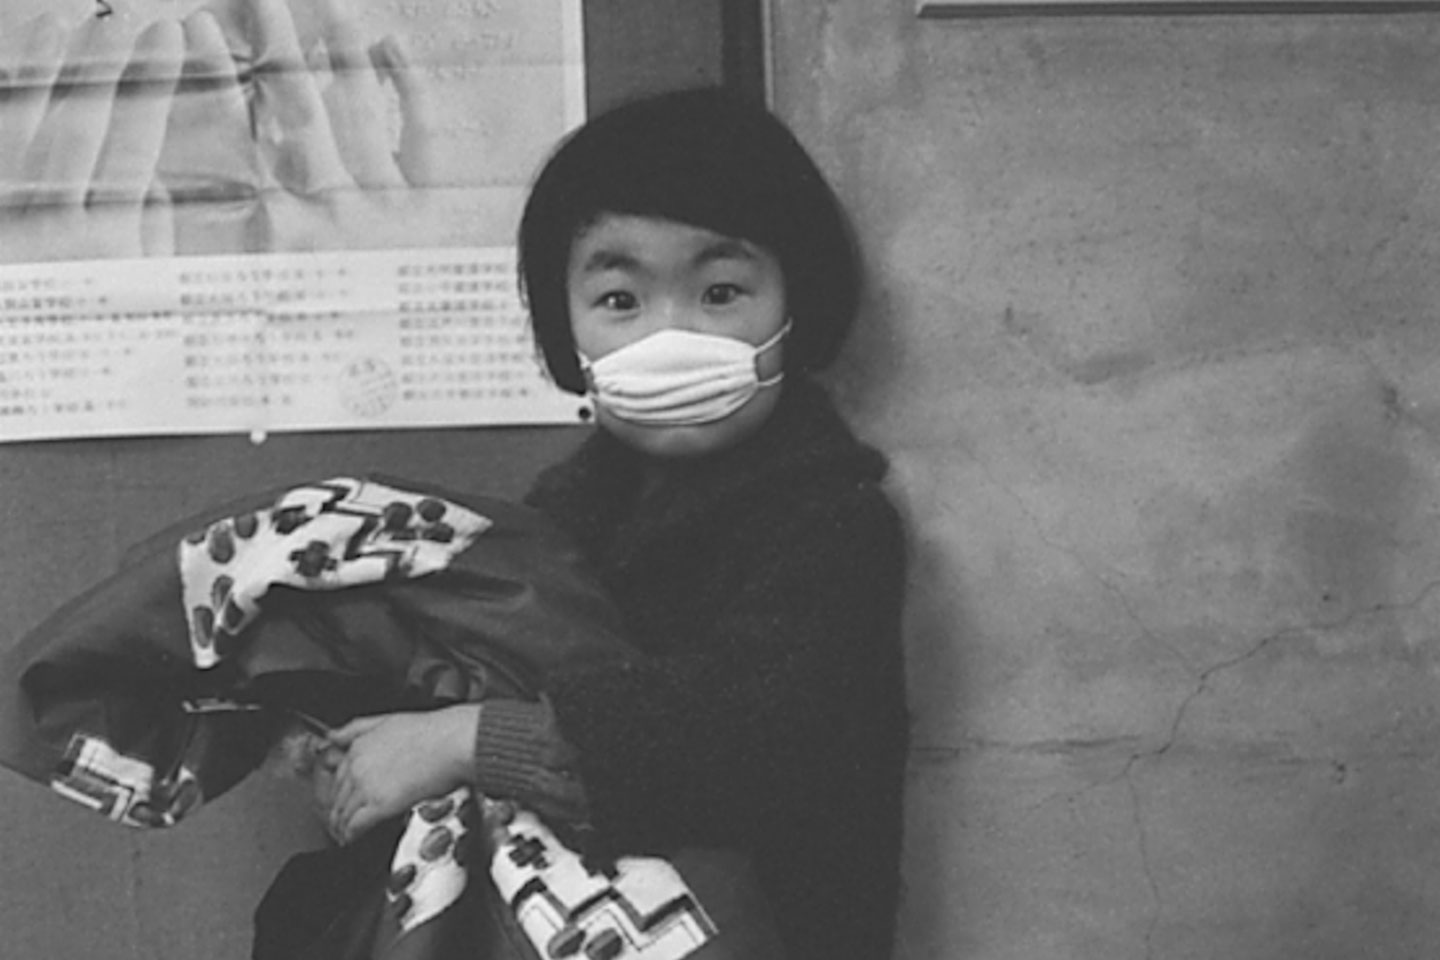 100 and counting of mask wearing in Japan | Gavi, the Vaccine Alliance